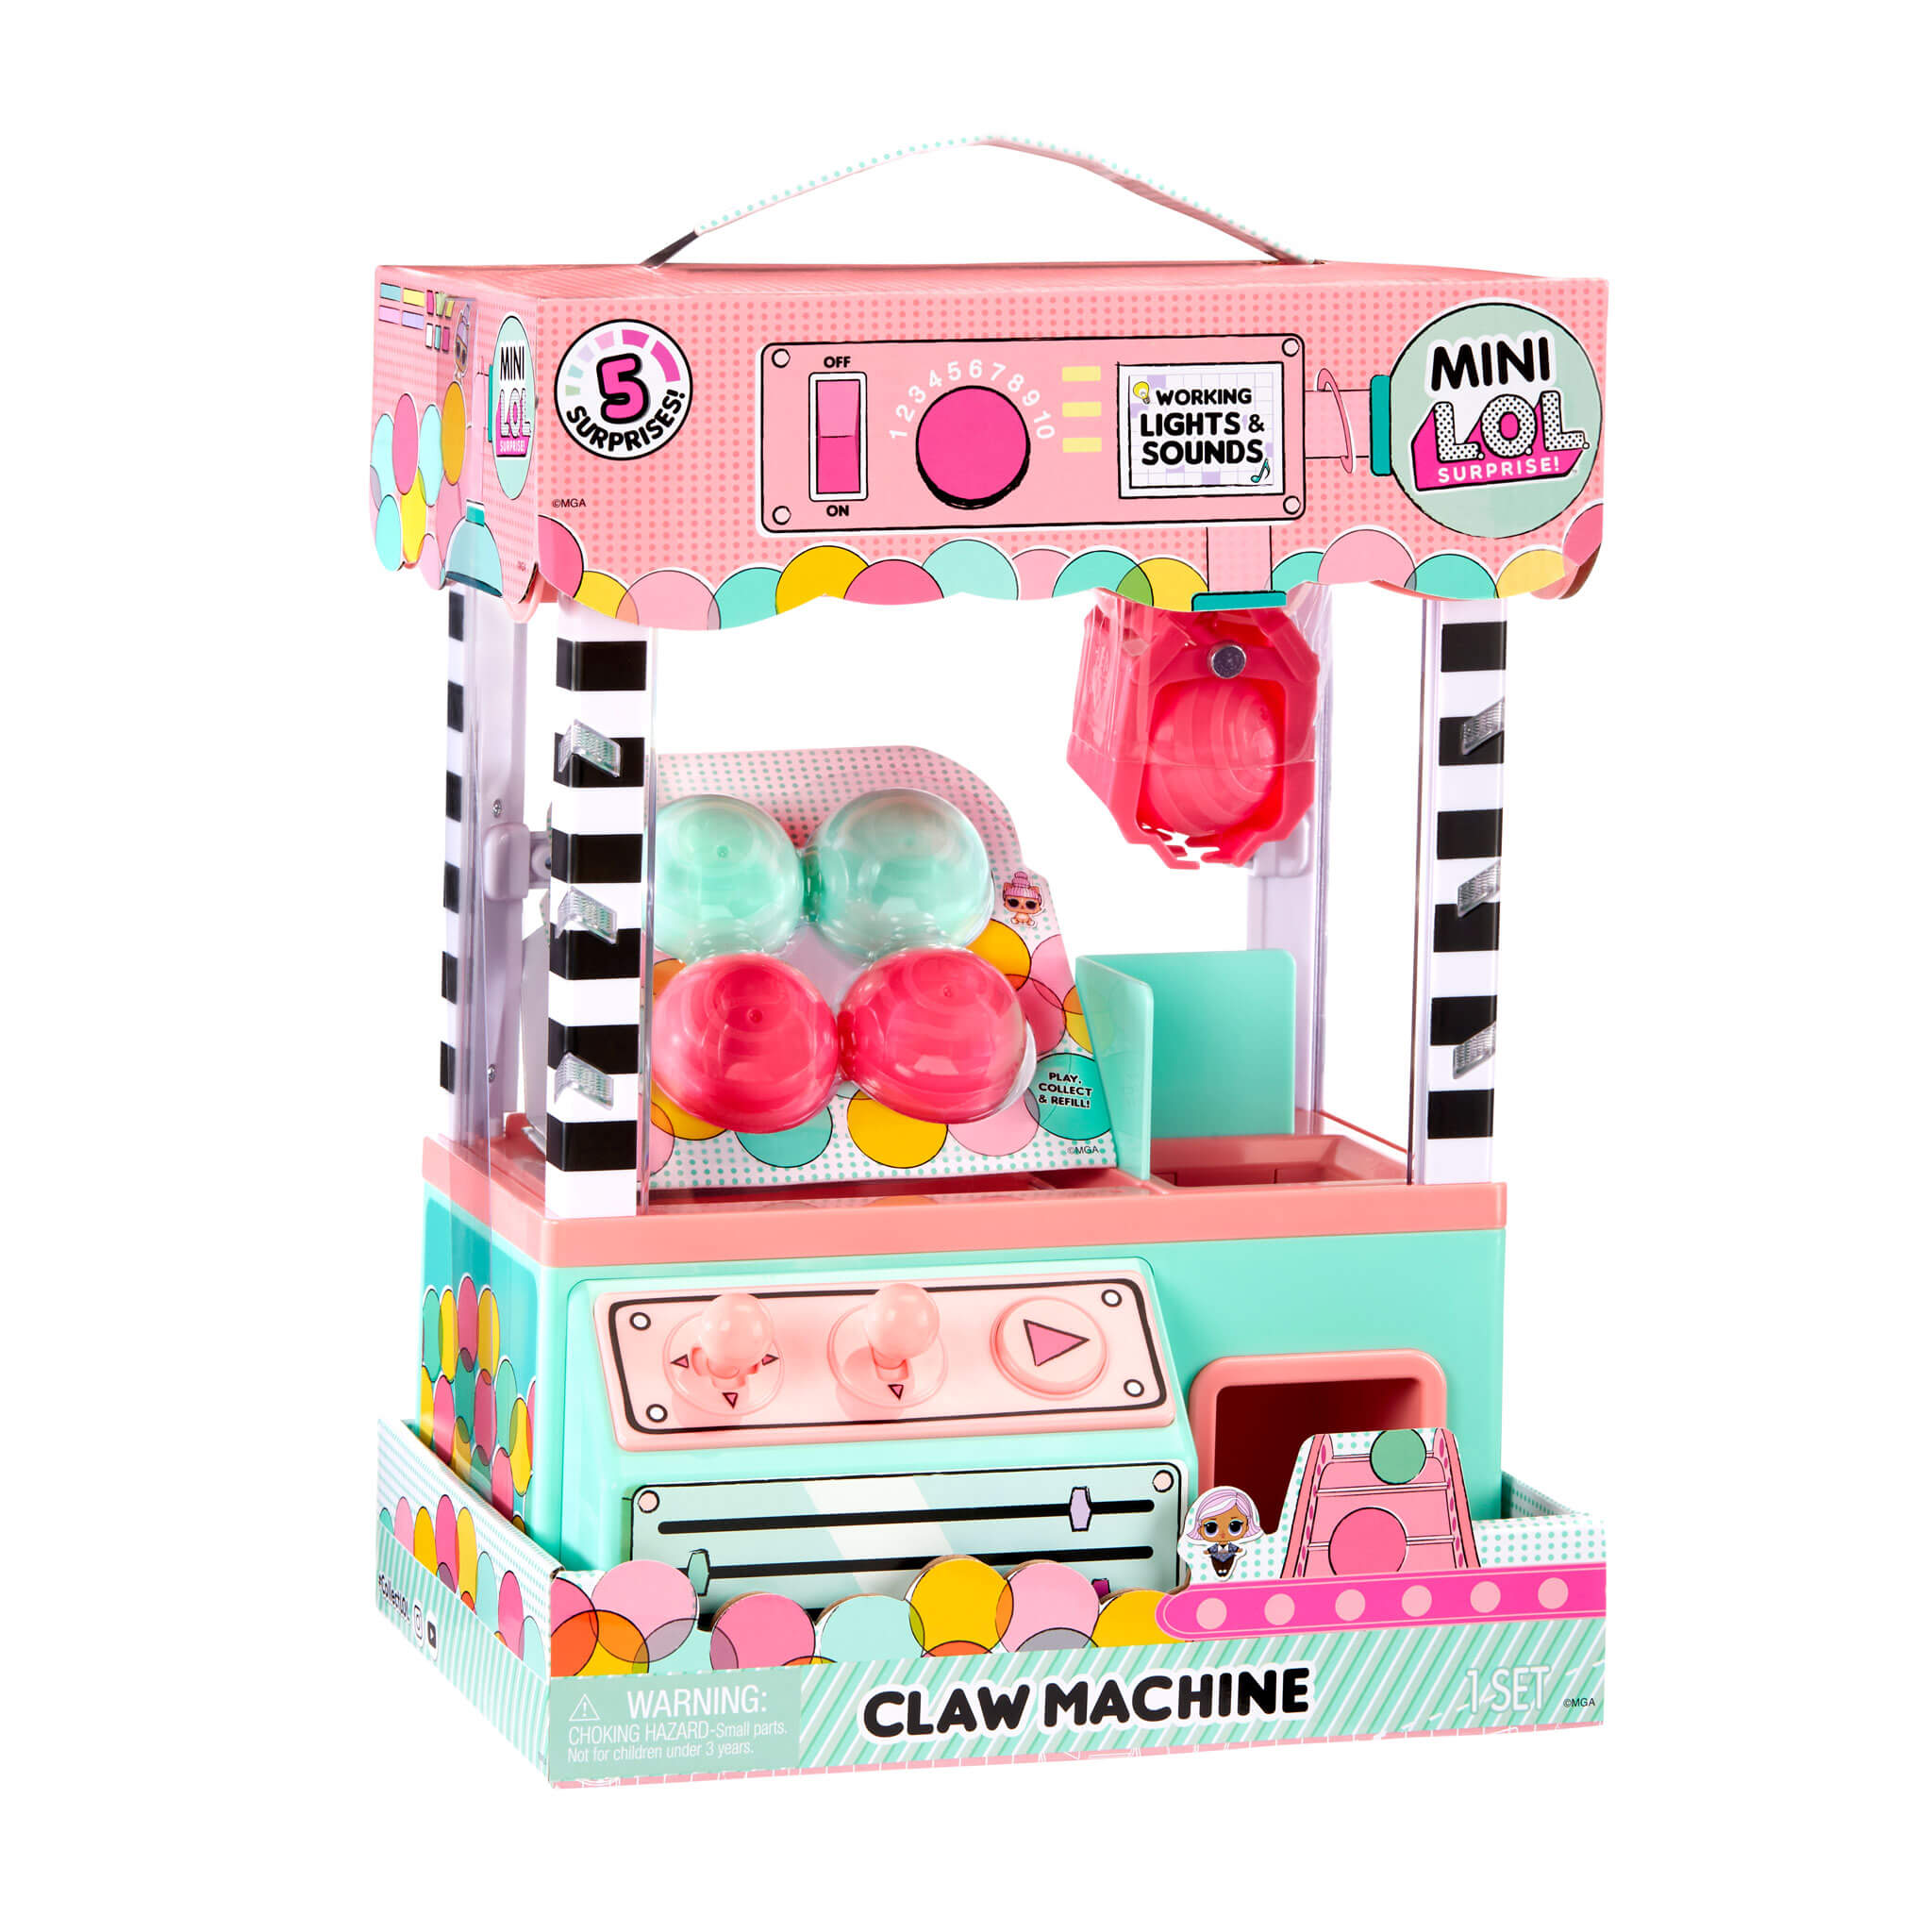 LOL Surprise Minis Claw Machine Playset with 5 Surprises